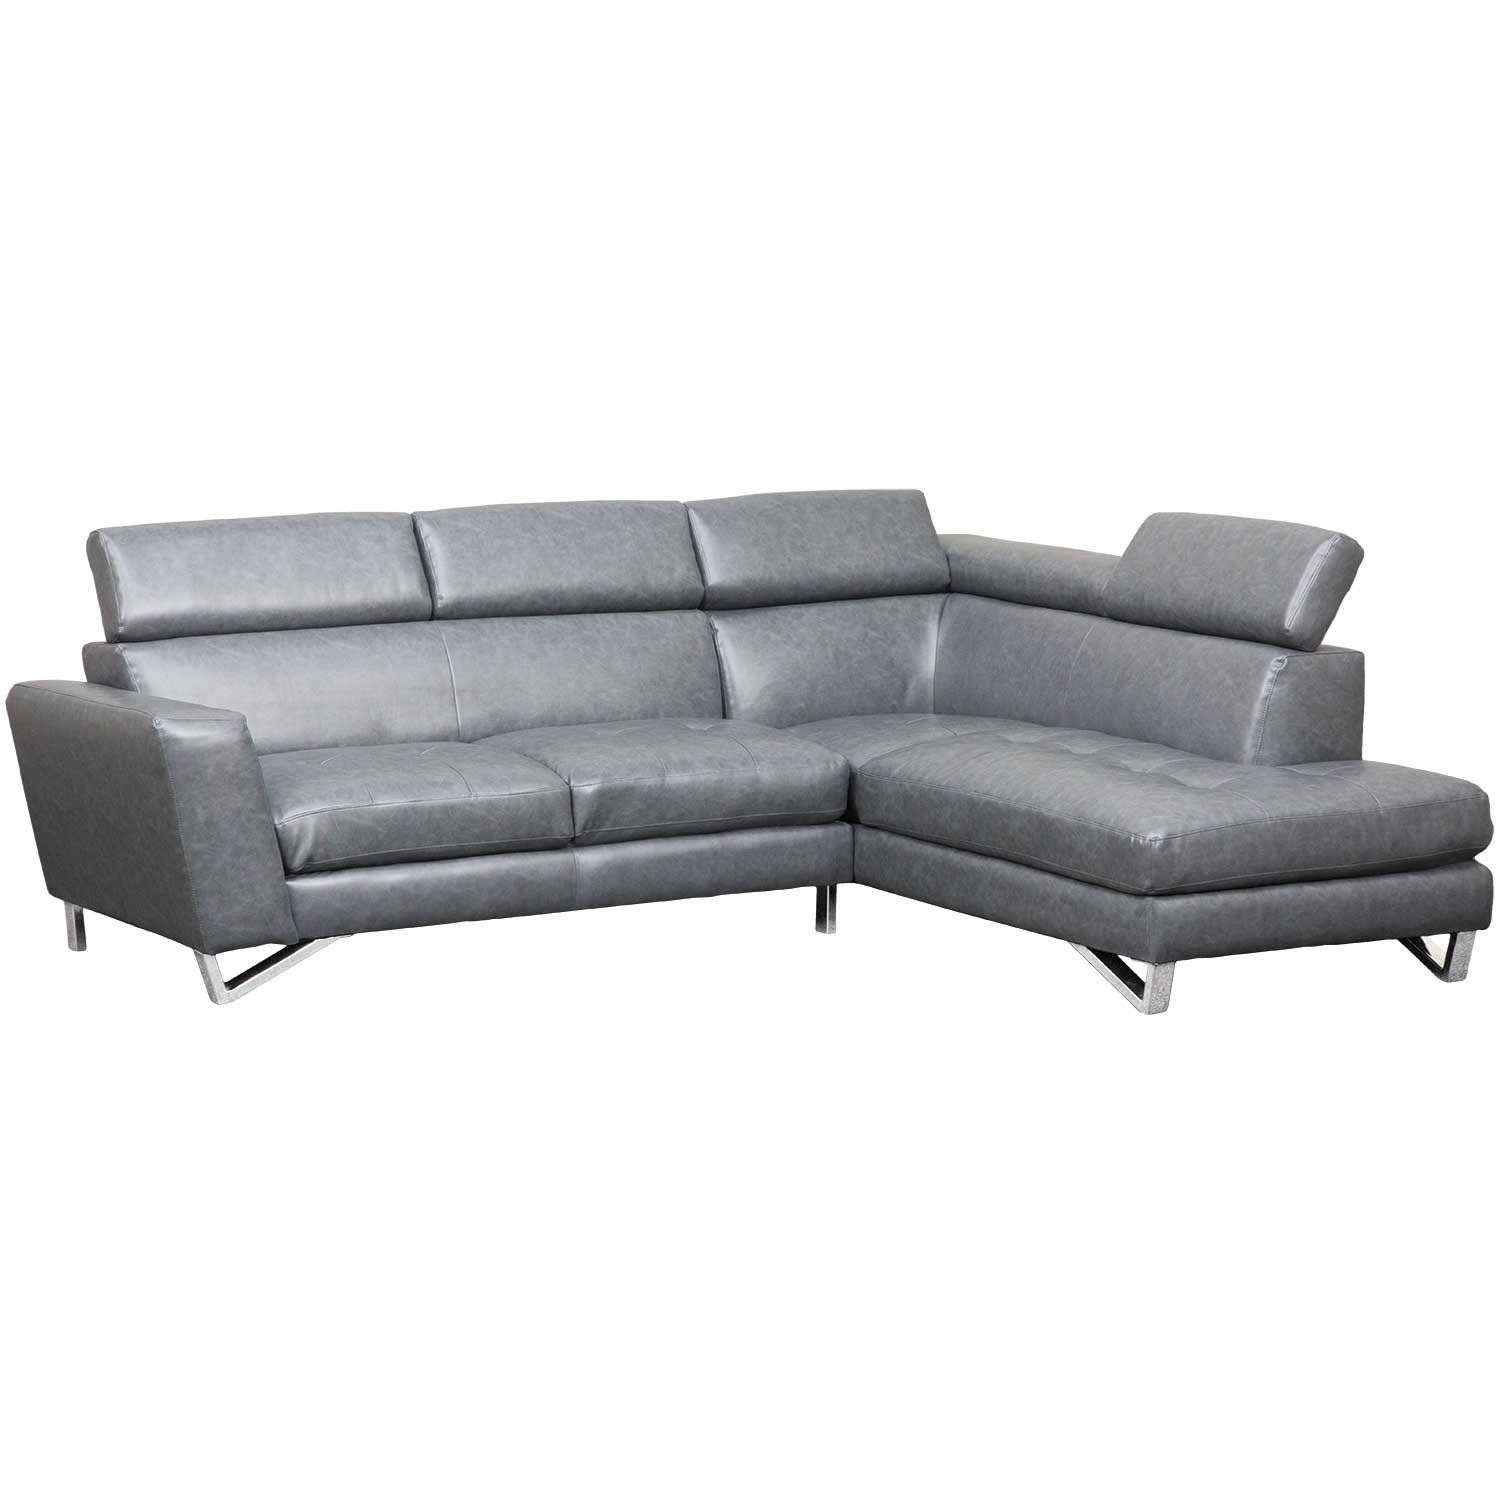 Gray 2 Pc Bonded Leather Sectional 1m 9836 2pc Cambridge 98360